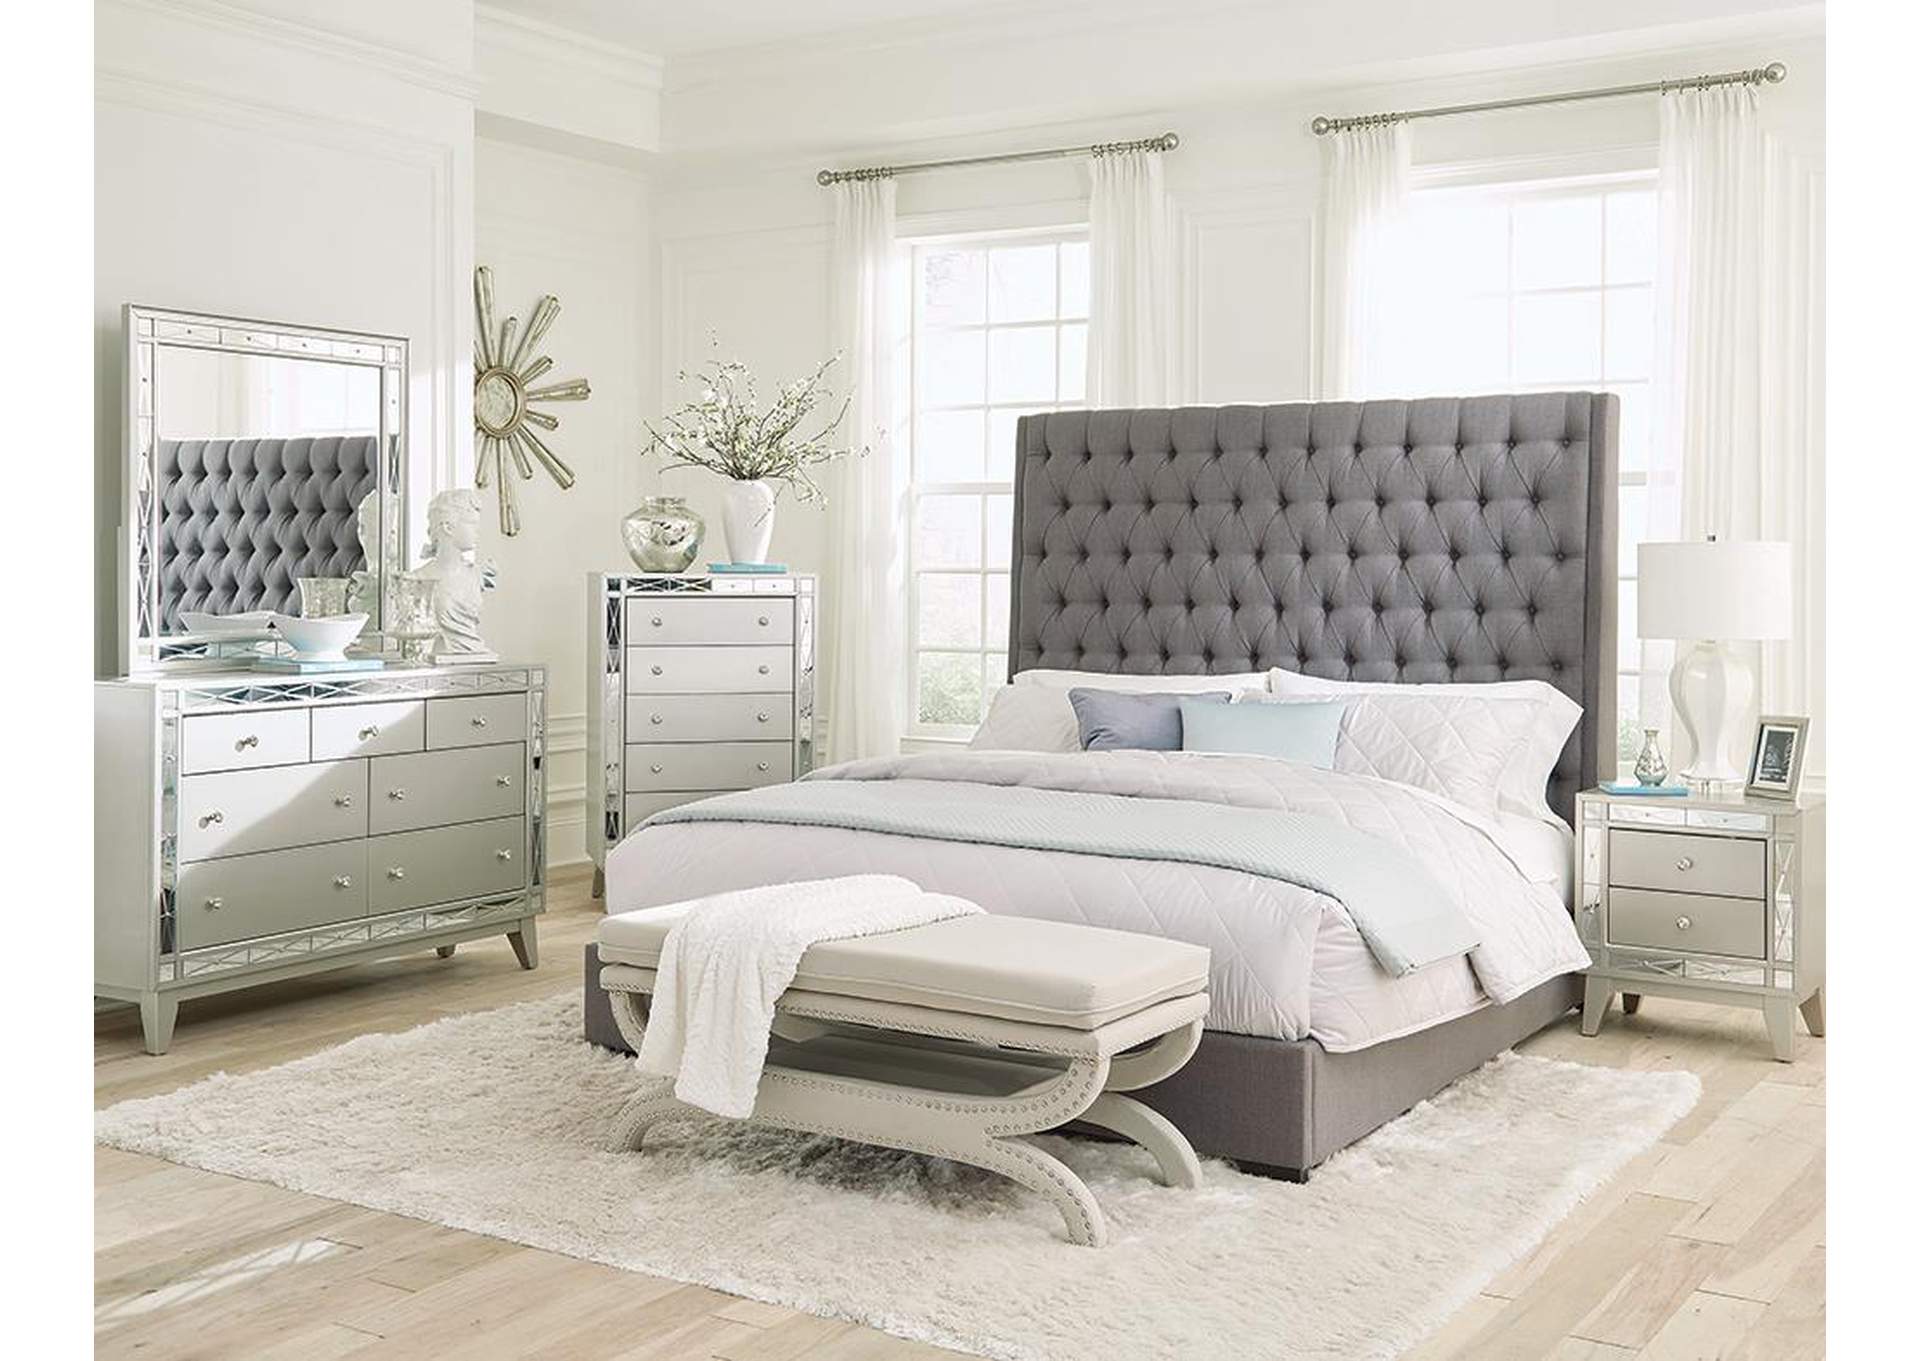 Camille Grey Upholstered Queen Bed,Coaster Furniture